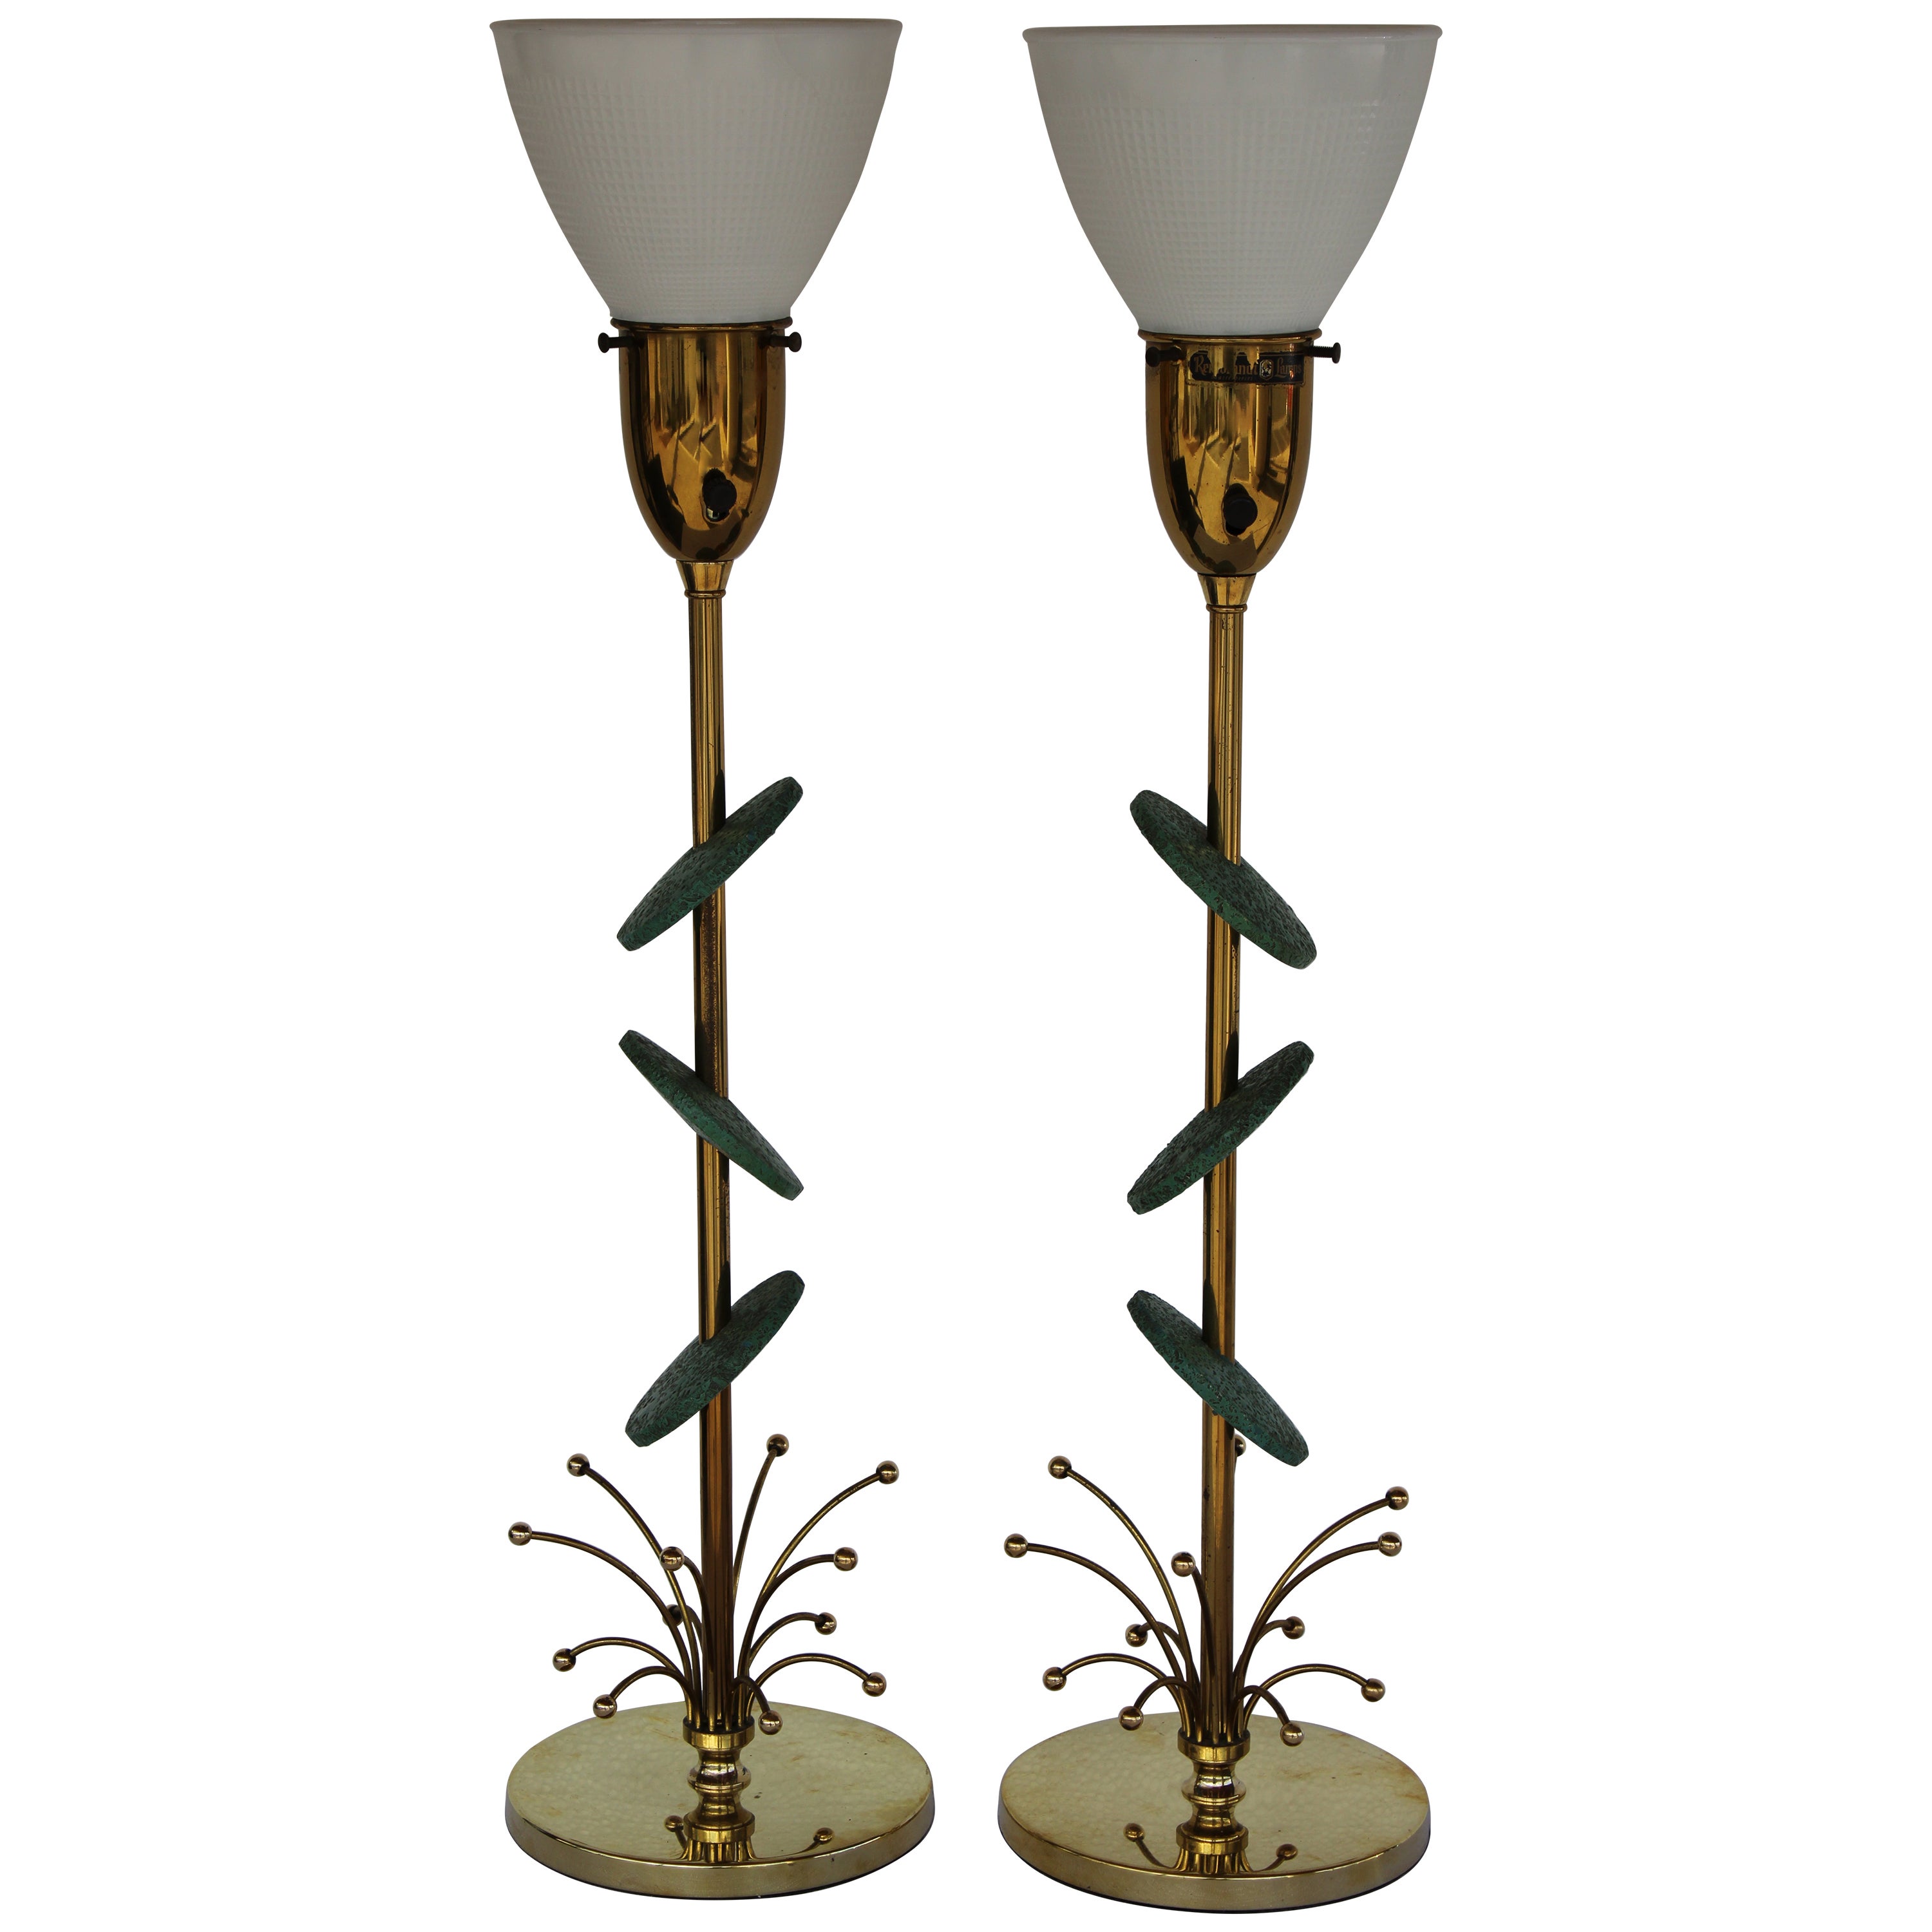 Pair of Lamps by Rembrandt Lamp Company (Green Ceramic Disks)